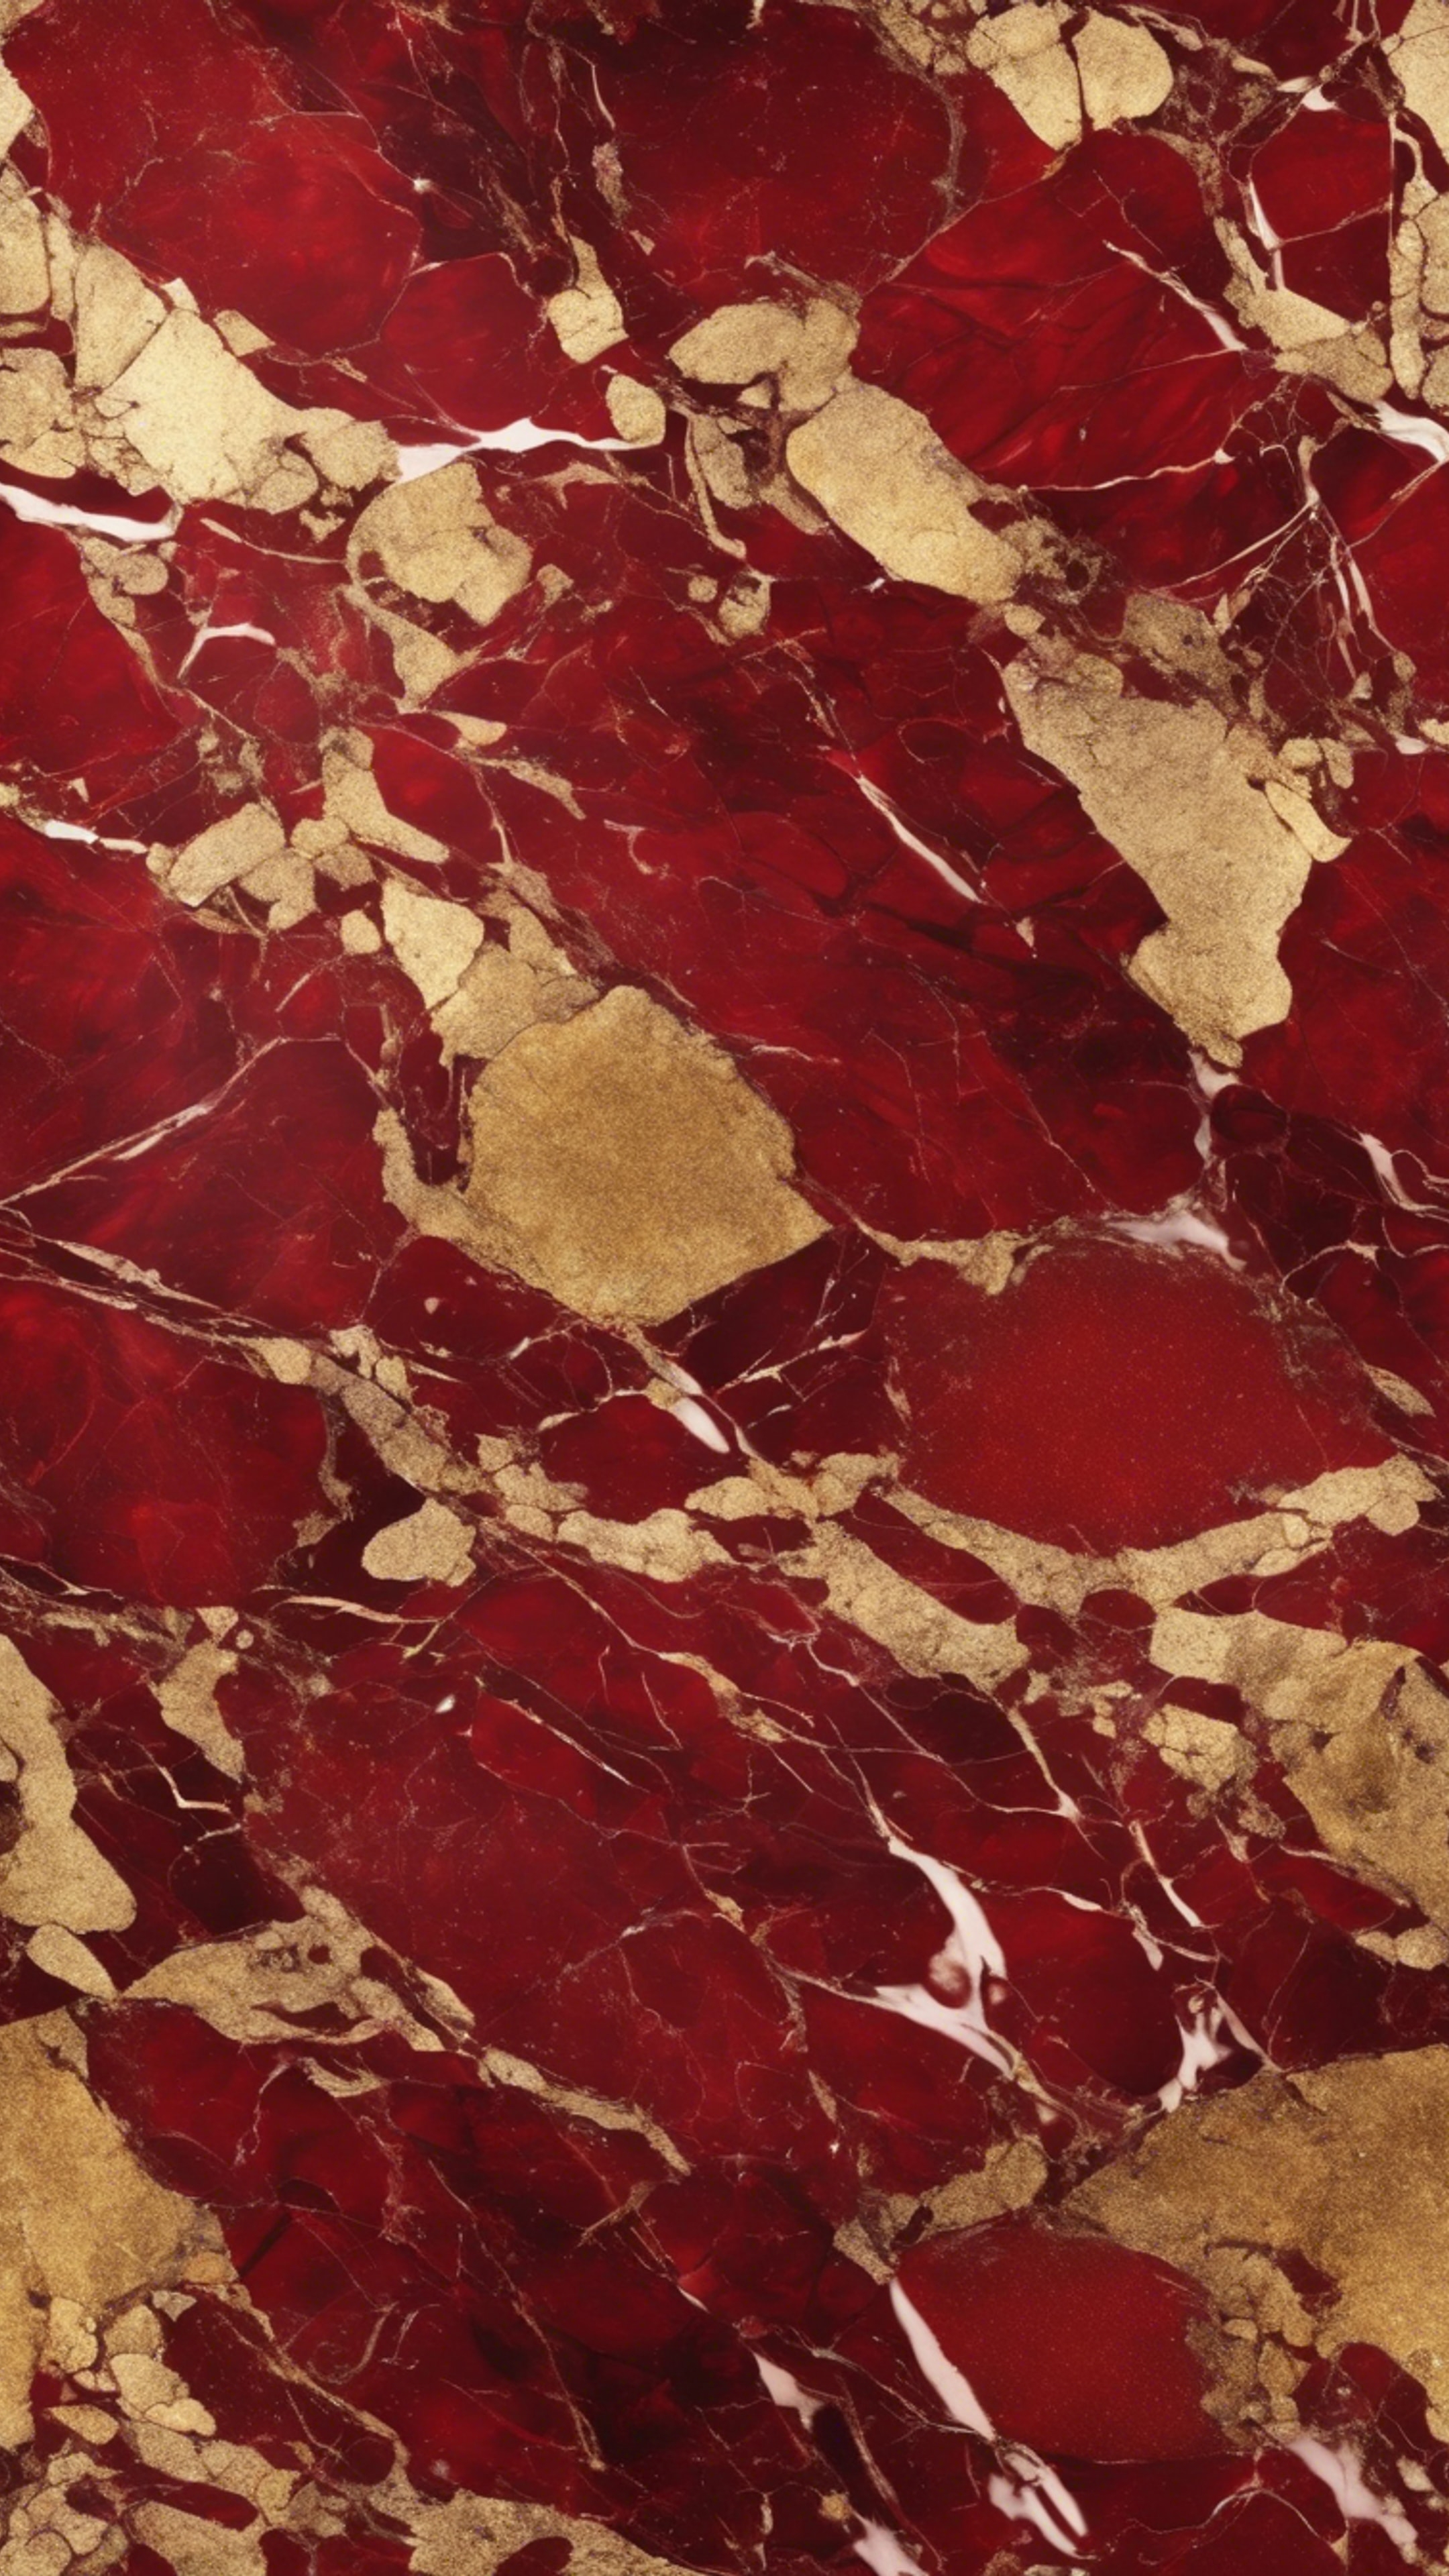 A play of rich red and shiny gold in a seamless marble pattern. Hintergrund[c352f9871c3046a1a297]